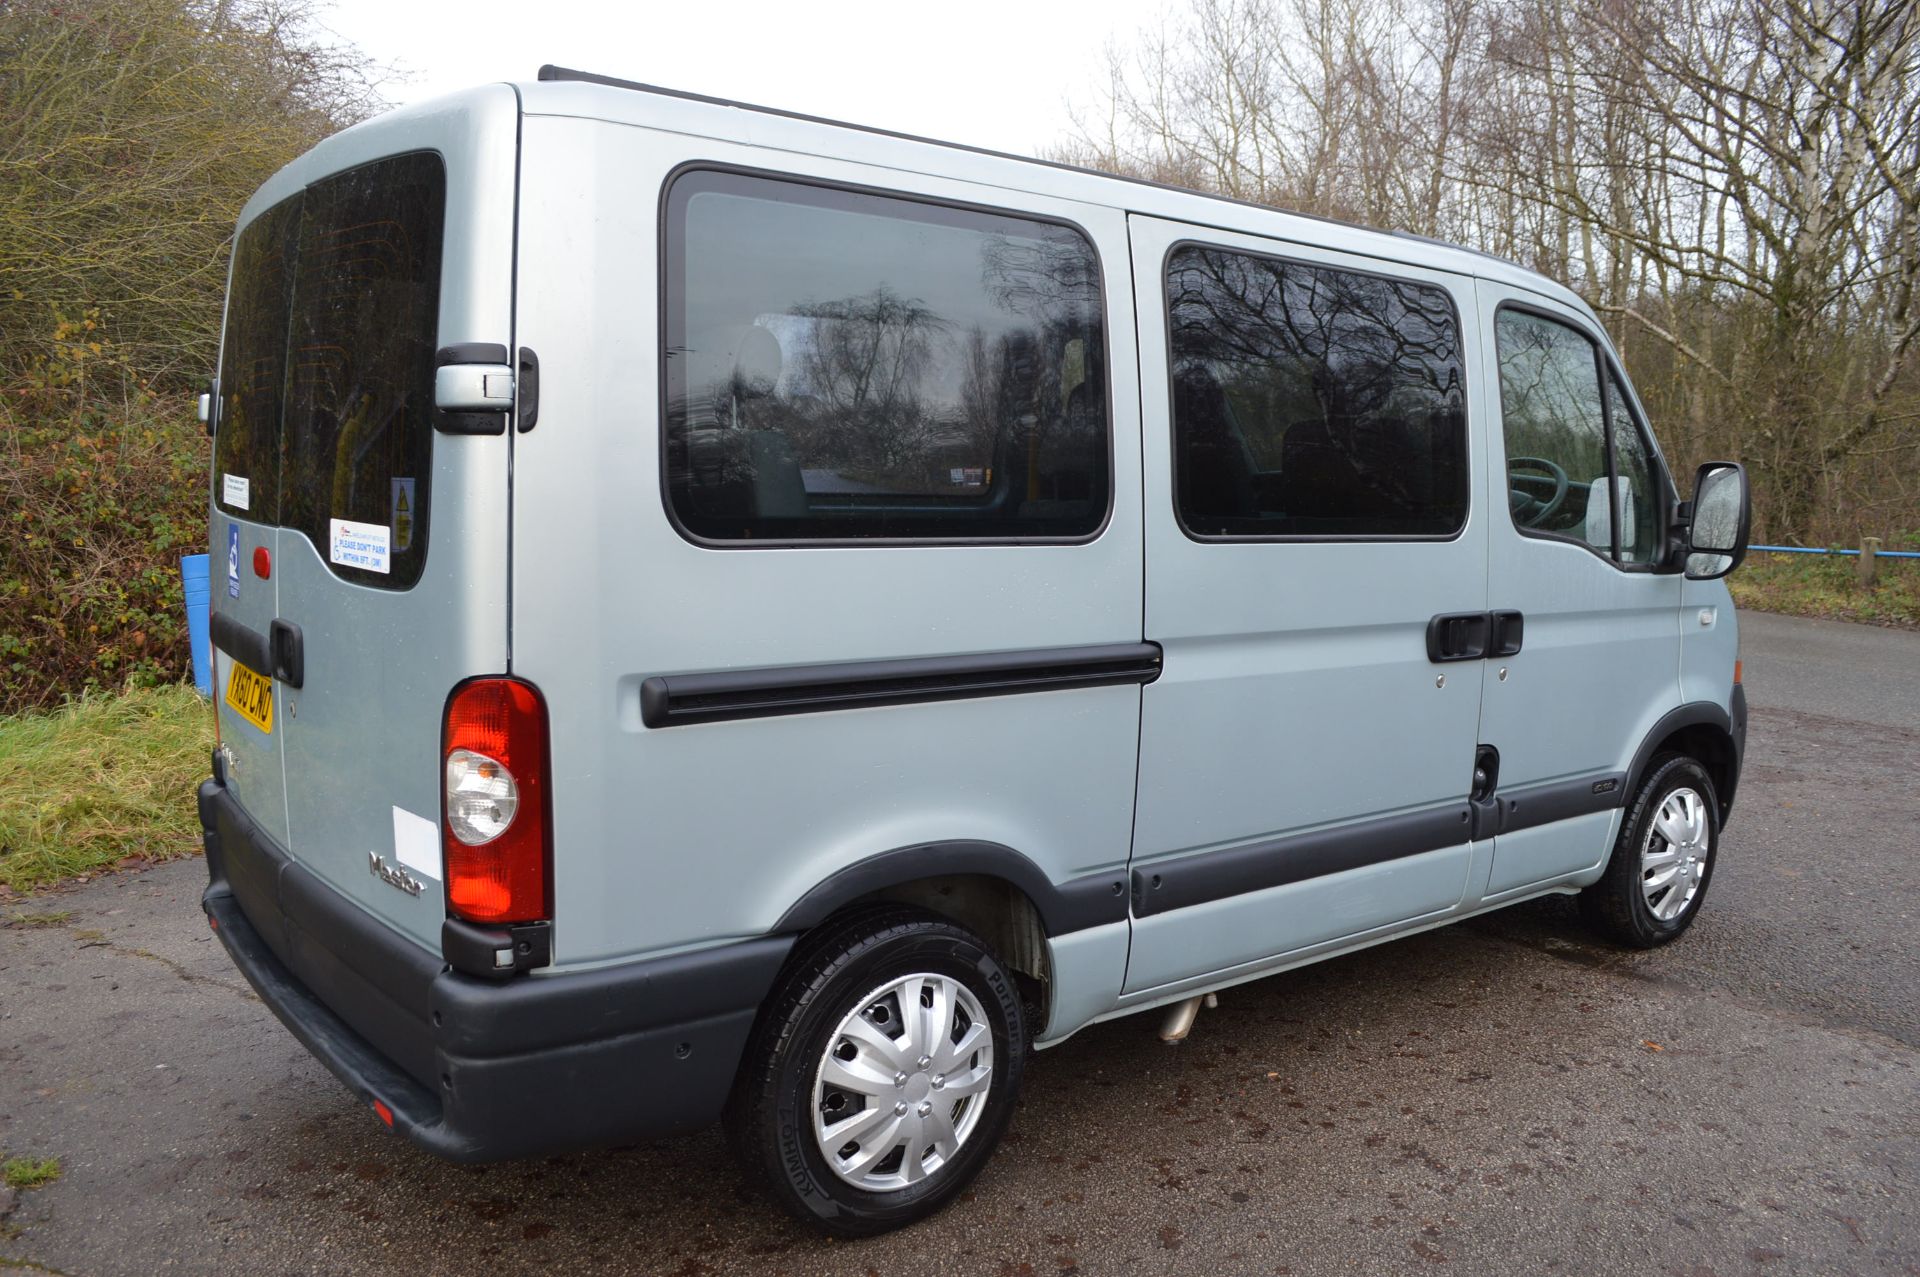 SUPER RARE 2010 RENAULT MASTER SL28 DCI 100 AUTO 2.5 DIESEL GREY DISABLED MINIBUS WITH RICON LIFT - Image 6 of 43